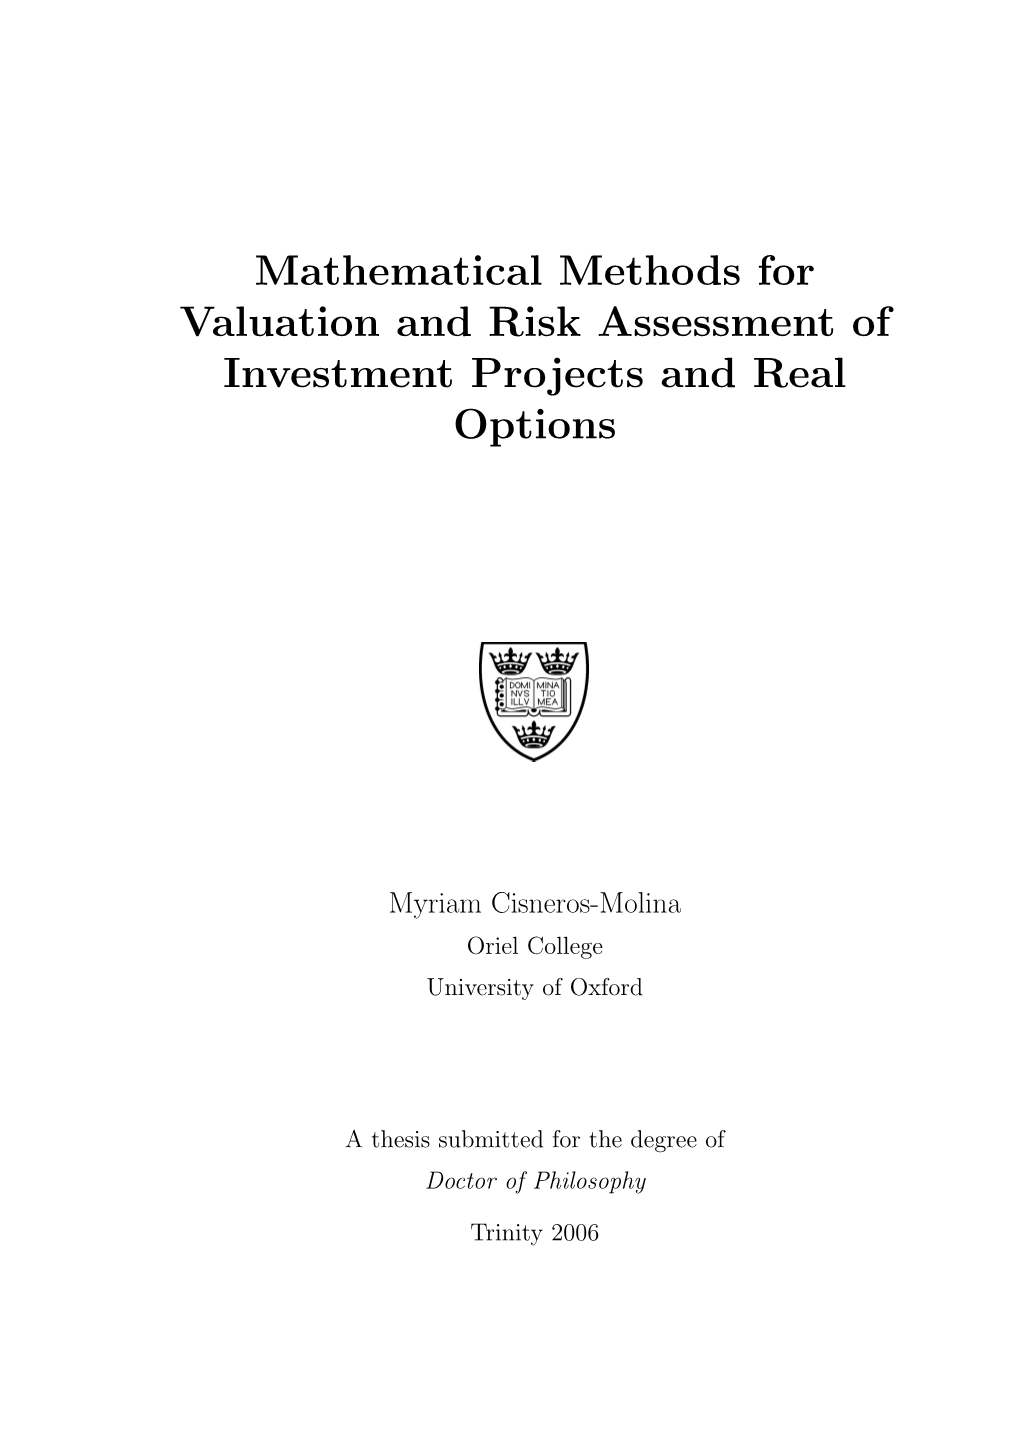 Mathematical Methods for Valuation and Risk Assessment of Investment Projects and Real Options¡